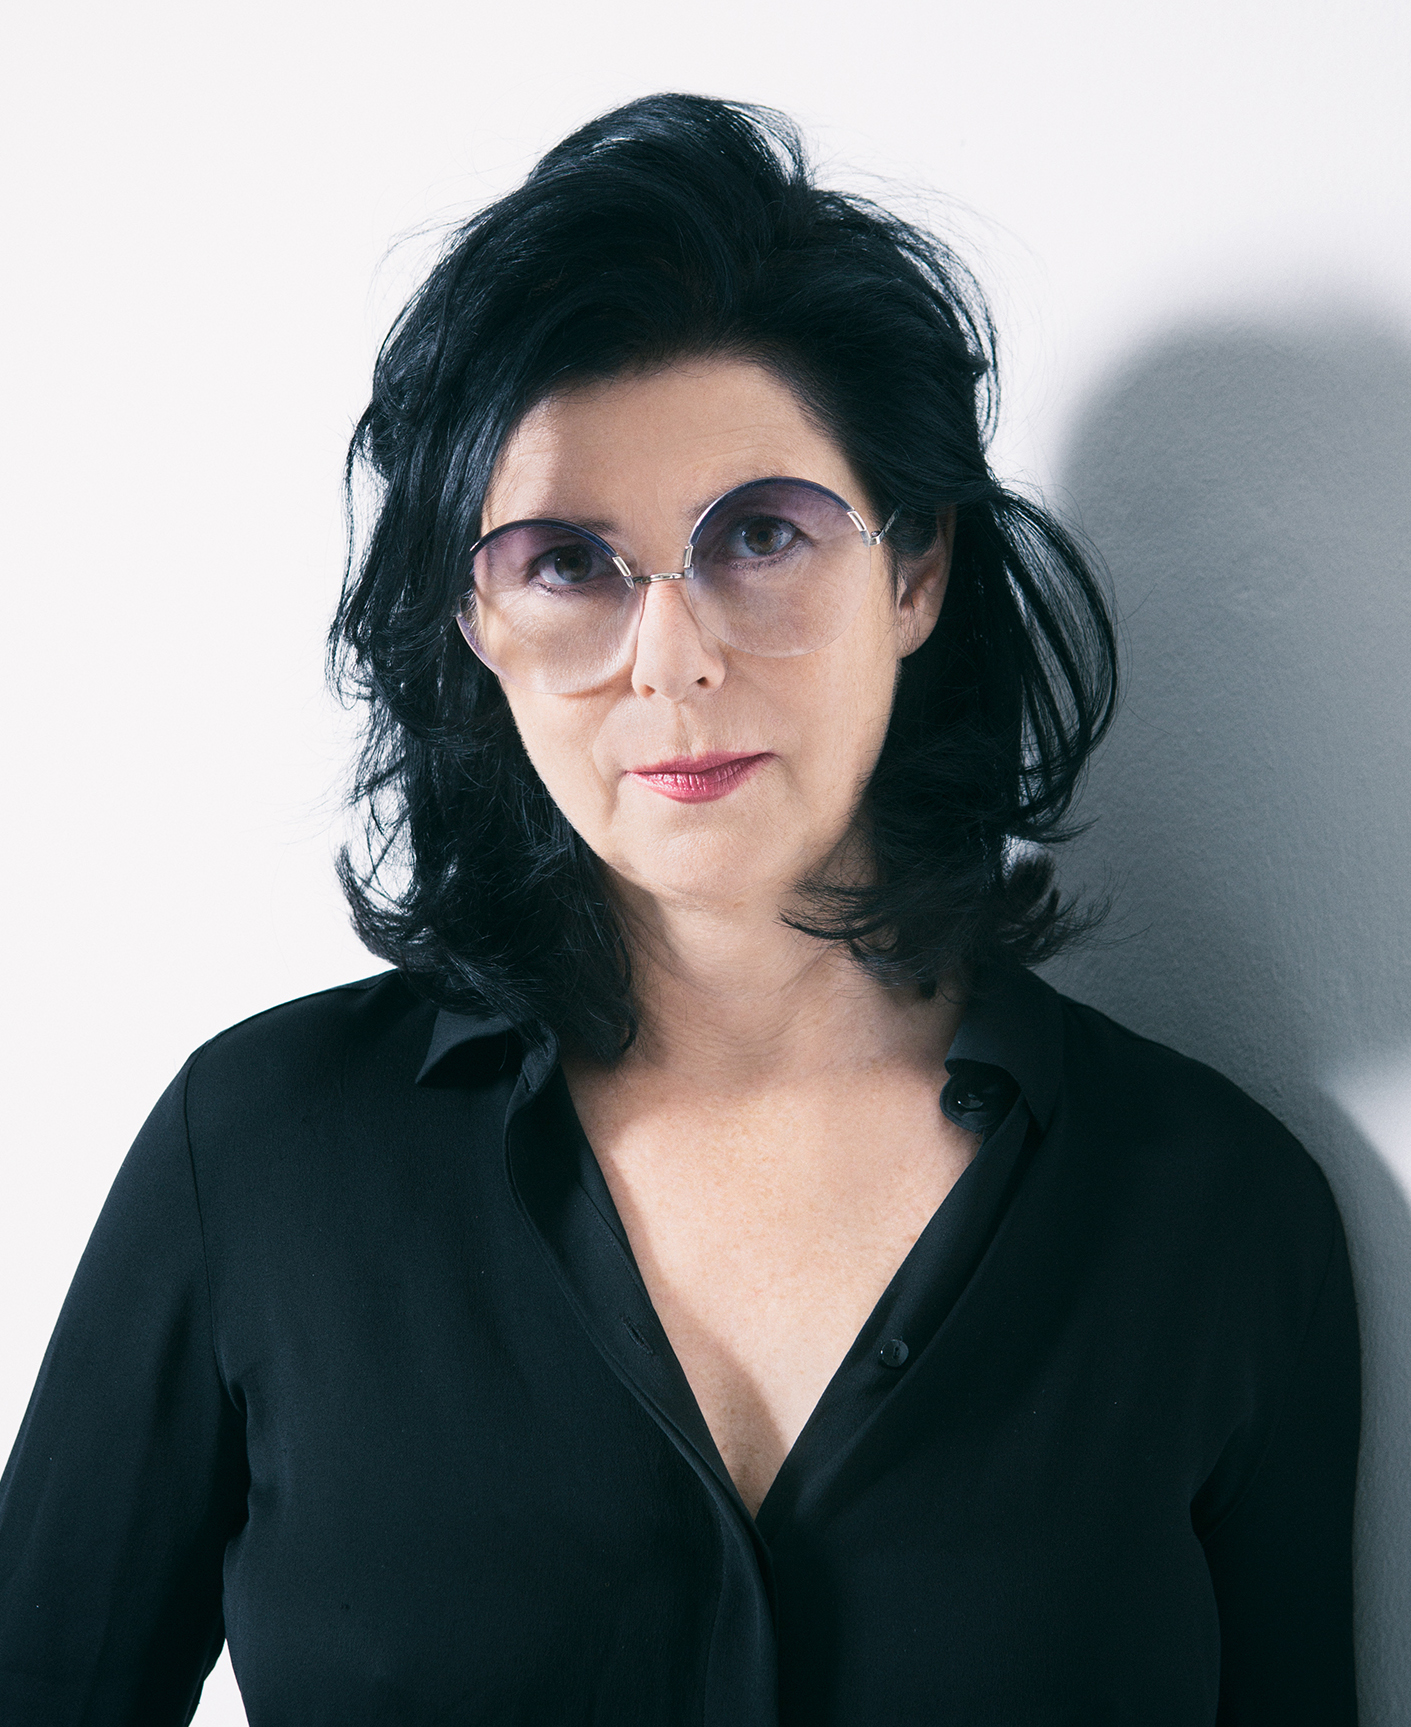 A woman in a black top with black hair wearing sunglasses in front of a white wall.